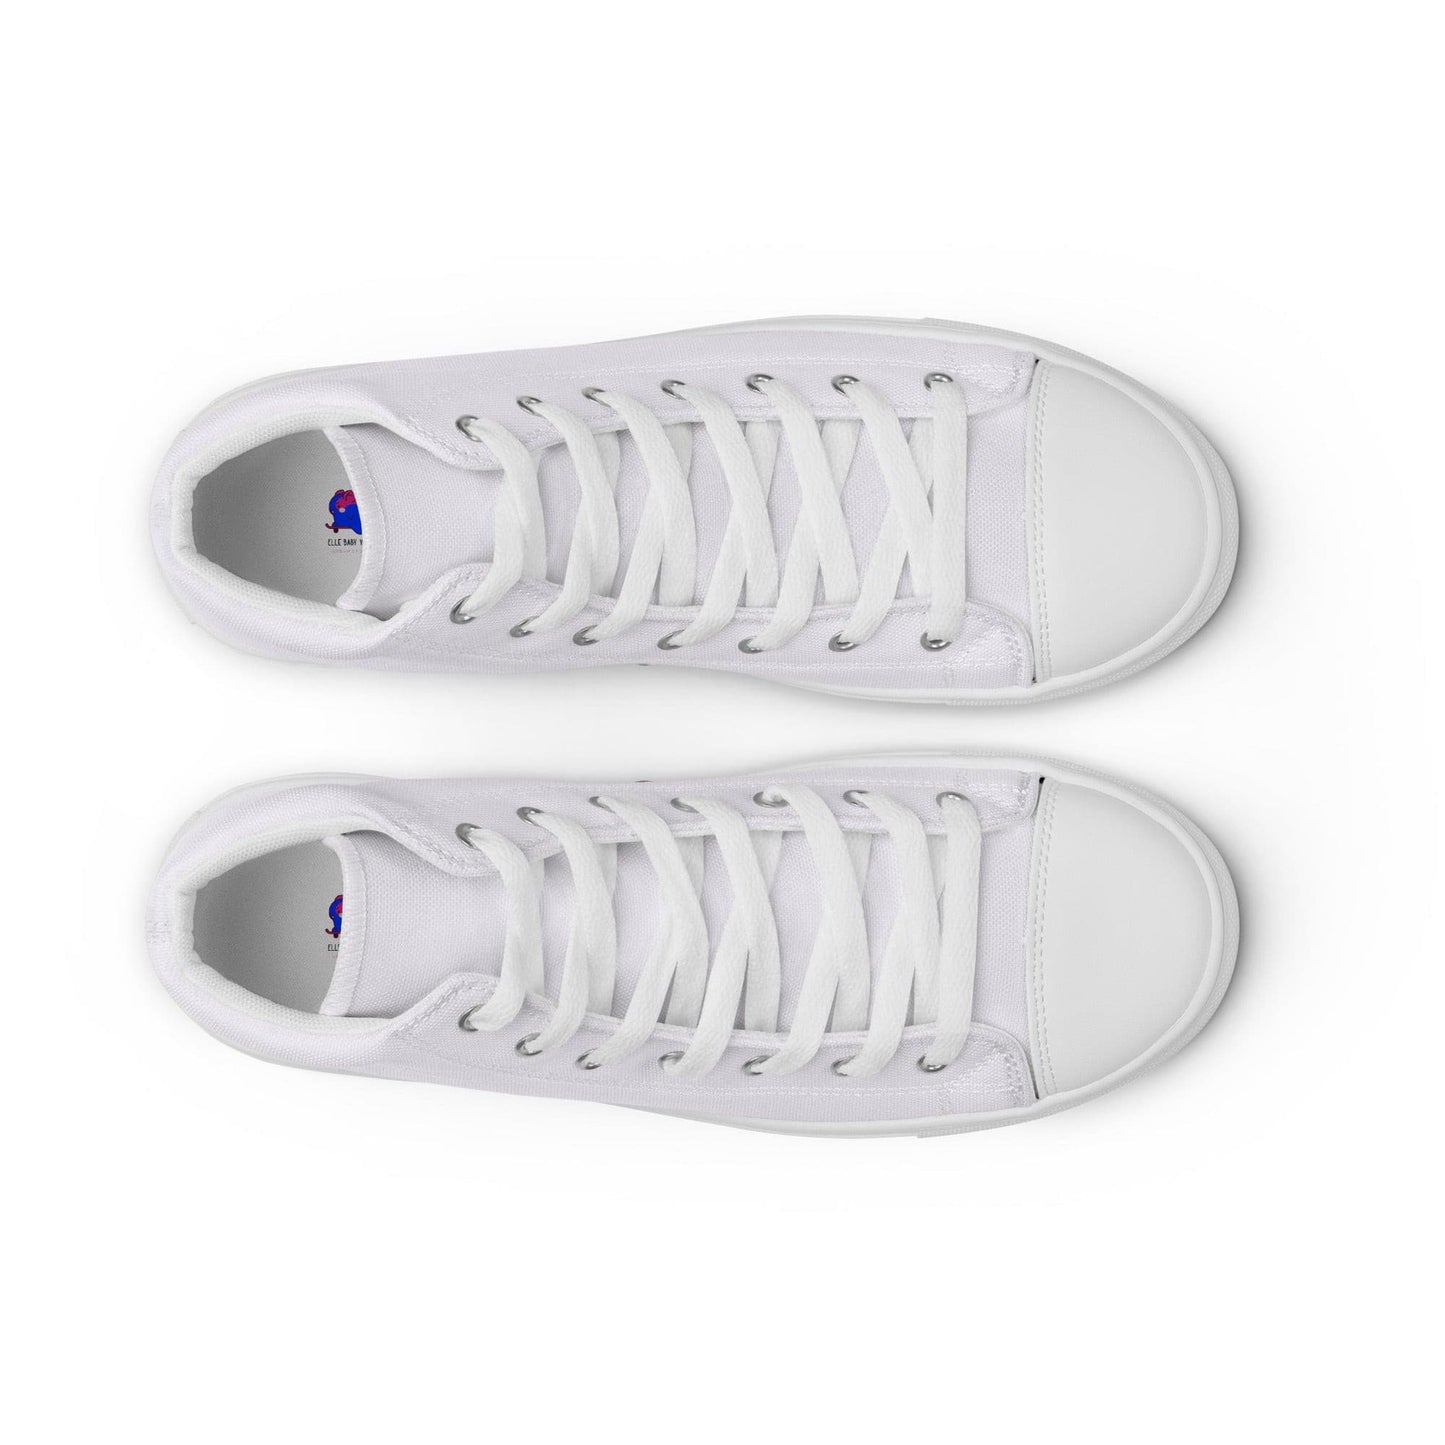 Classic White high top canvas shoes (Men's Sizing)